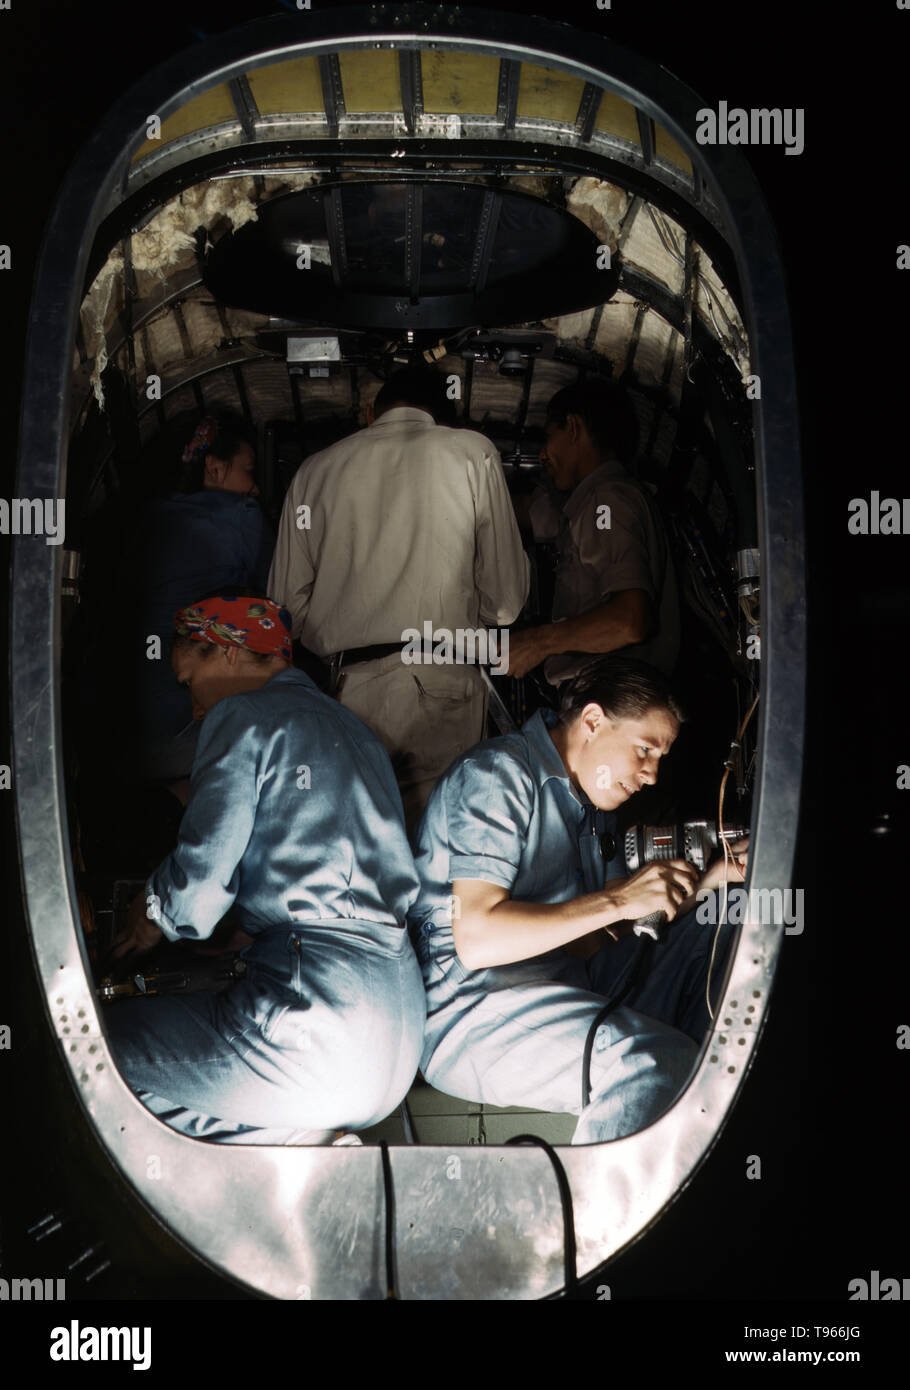 Working inside fuselage of a Liberator Bomber, Consolidated Aircraft Corp., Fort Worth, Texas. Although the image of 'Rosie the Riveter' reflected the industrial work of welders and riveters, the majority of working women filled non-factory positions in every sector of the economy. What unified the experiences of these women was that they proved to themselves, and the country, that they could do a man's job and could do it well. Photographed by Howard R. Hollem, 1942. Stock Photo